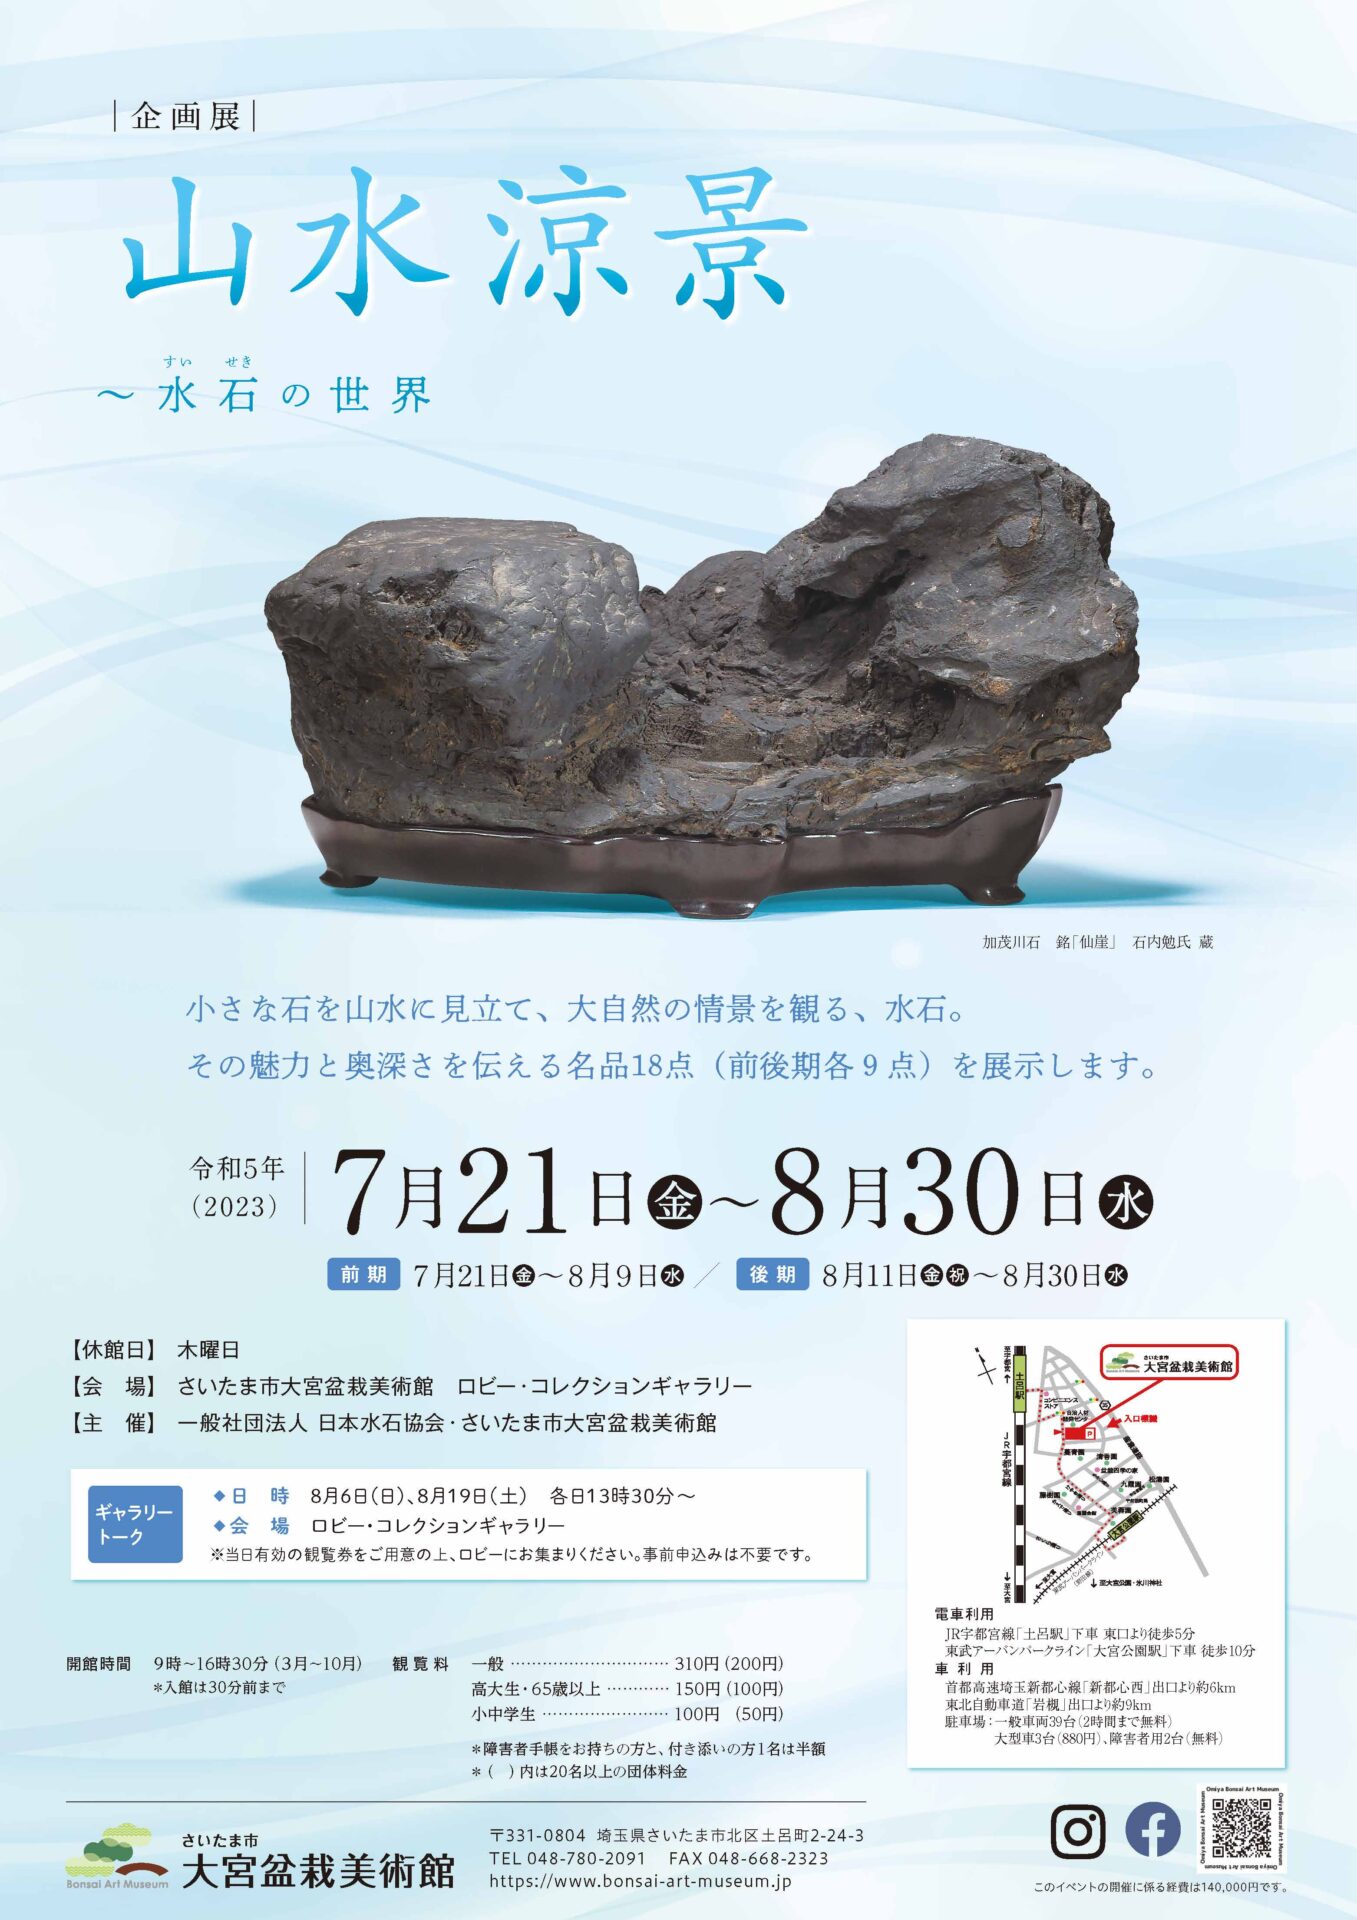 Special Exhibition – Refreshing Landscape Scenery – World of Suiseki